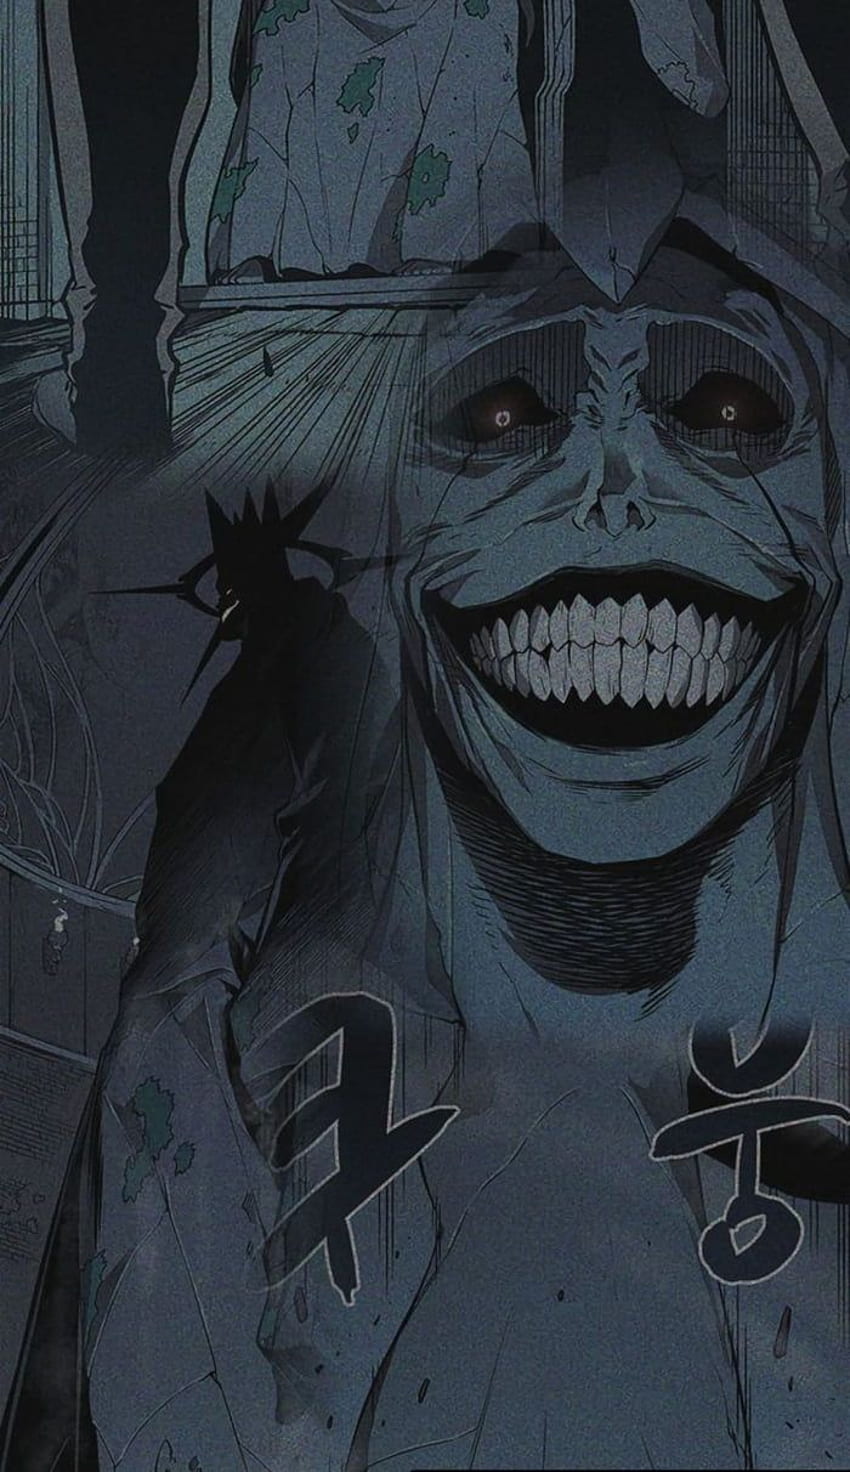 The 15 best horror anime series streaming right now